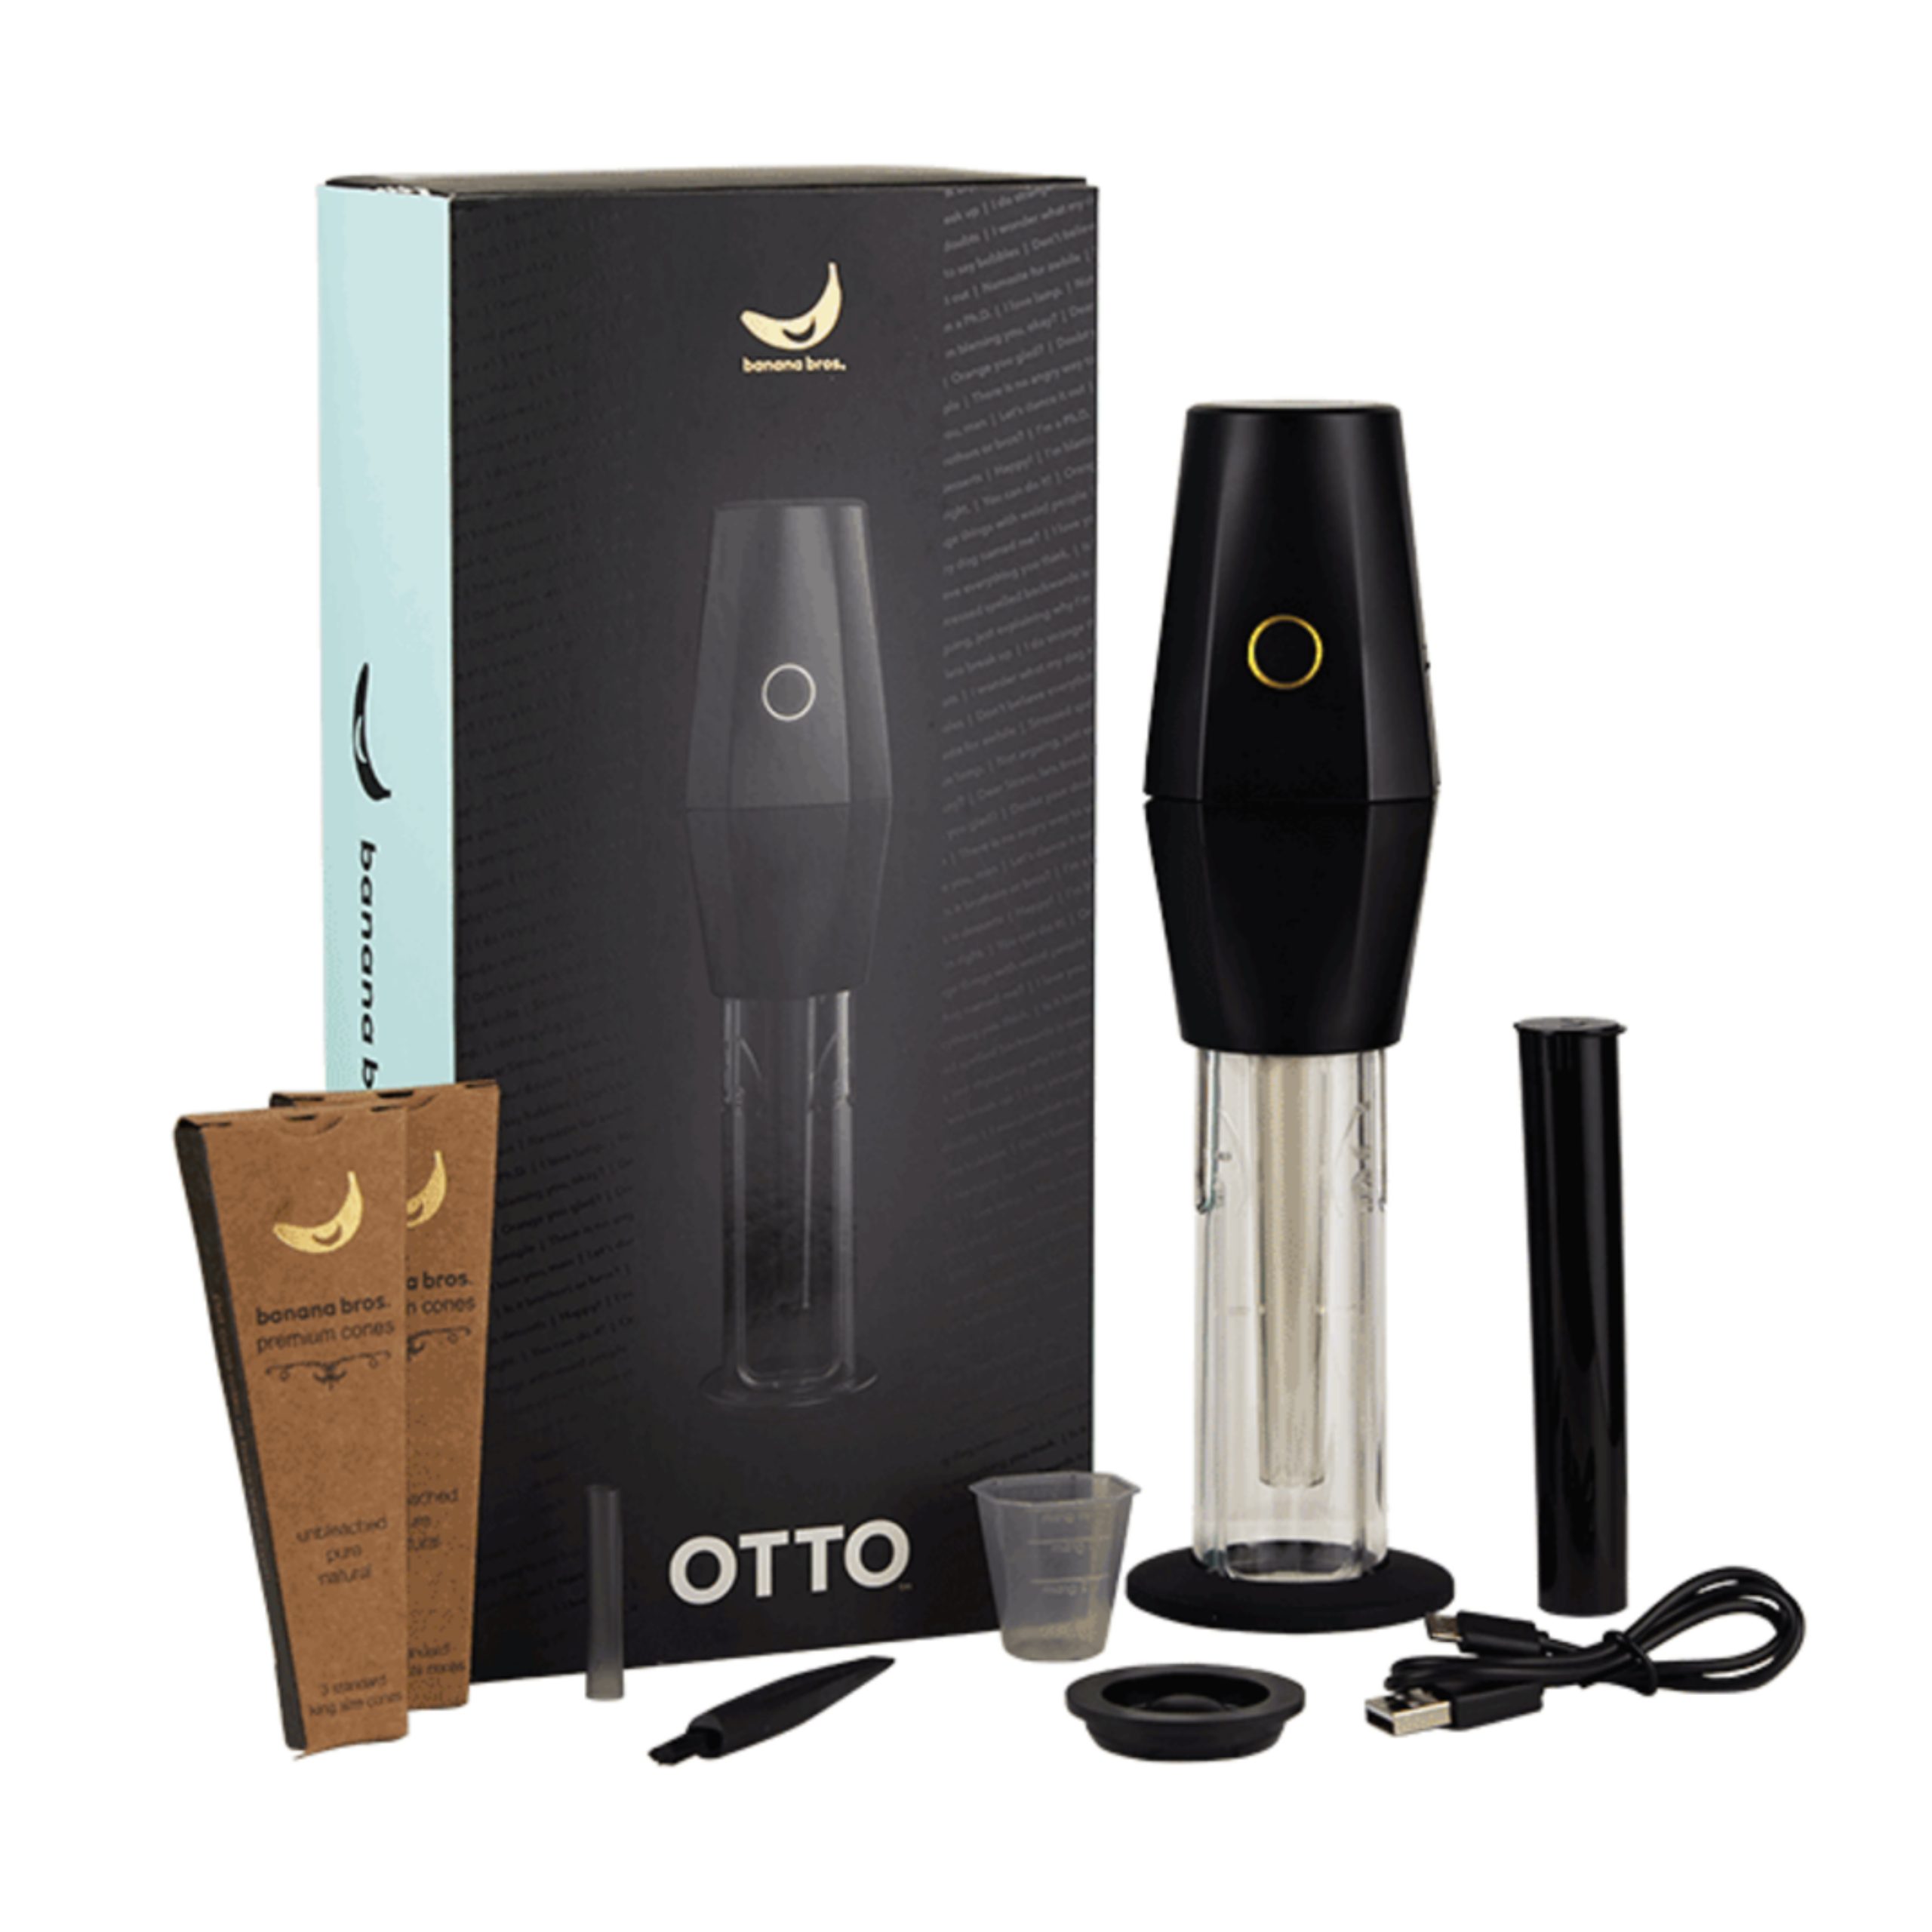 https://thedrugstore.com/wp-content/uploads/2021/04/OTTO-BANANA-BROTHERS-AUTOMATIC-GRINDER-SET-scaled.jpg